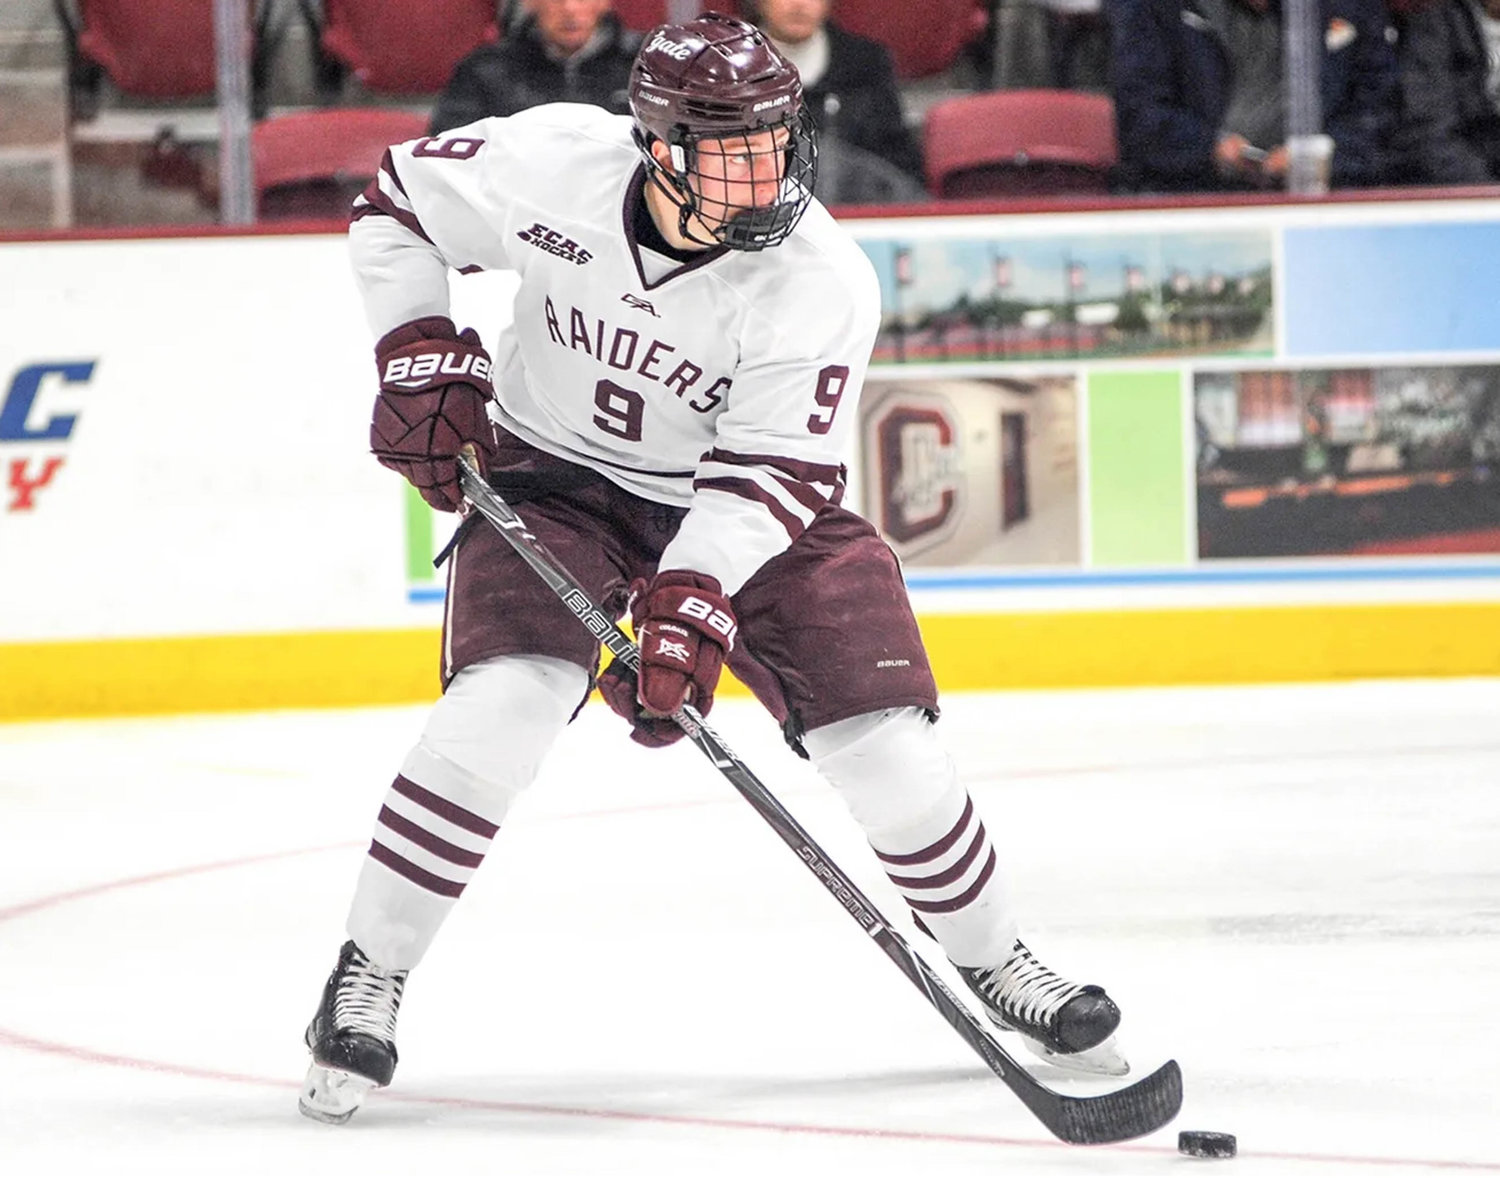 The Toronto Maple Leafs have signed forward Bobby McMann to a two-year, two-way future contract. McMann is a 2020 Colgate University graduate. In his second season with the Maple Leafs’ AHL affiliate the Toronto Marlies, he tallied 35 points (24 goals, 11 assists).